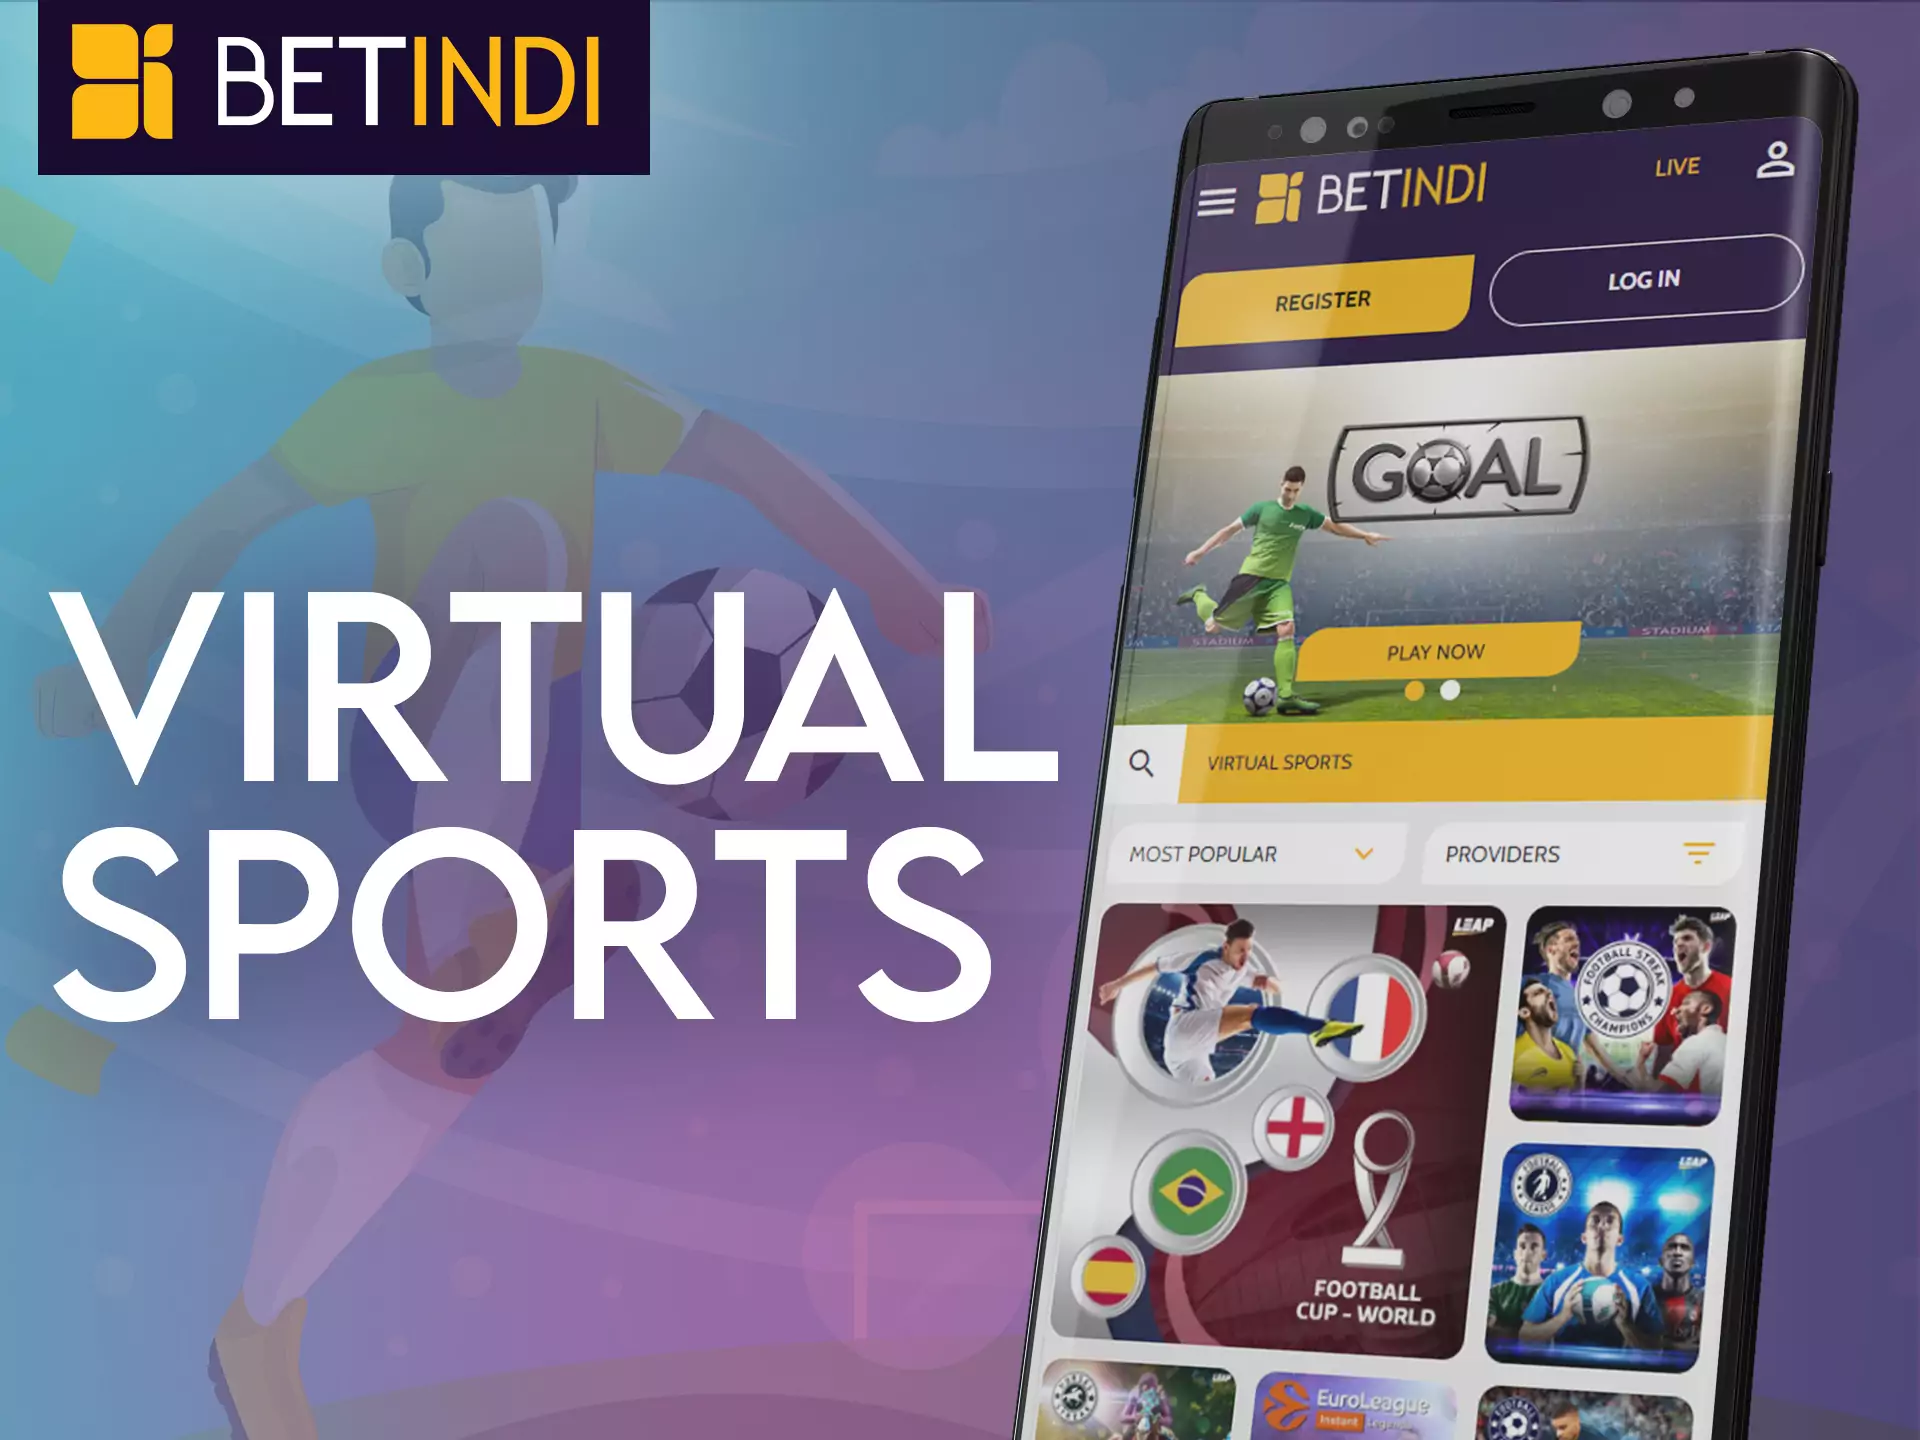 Place bets on virtual sports with Betindi.